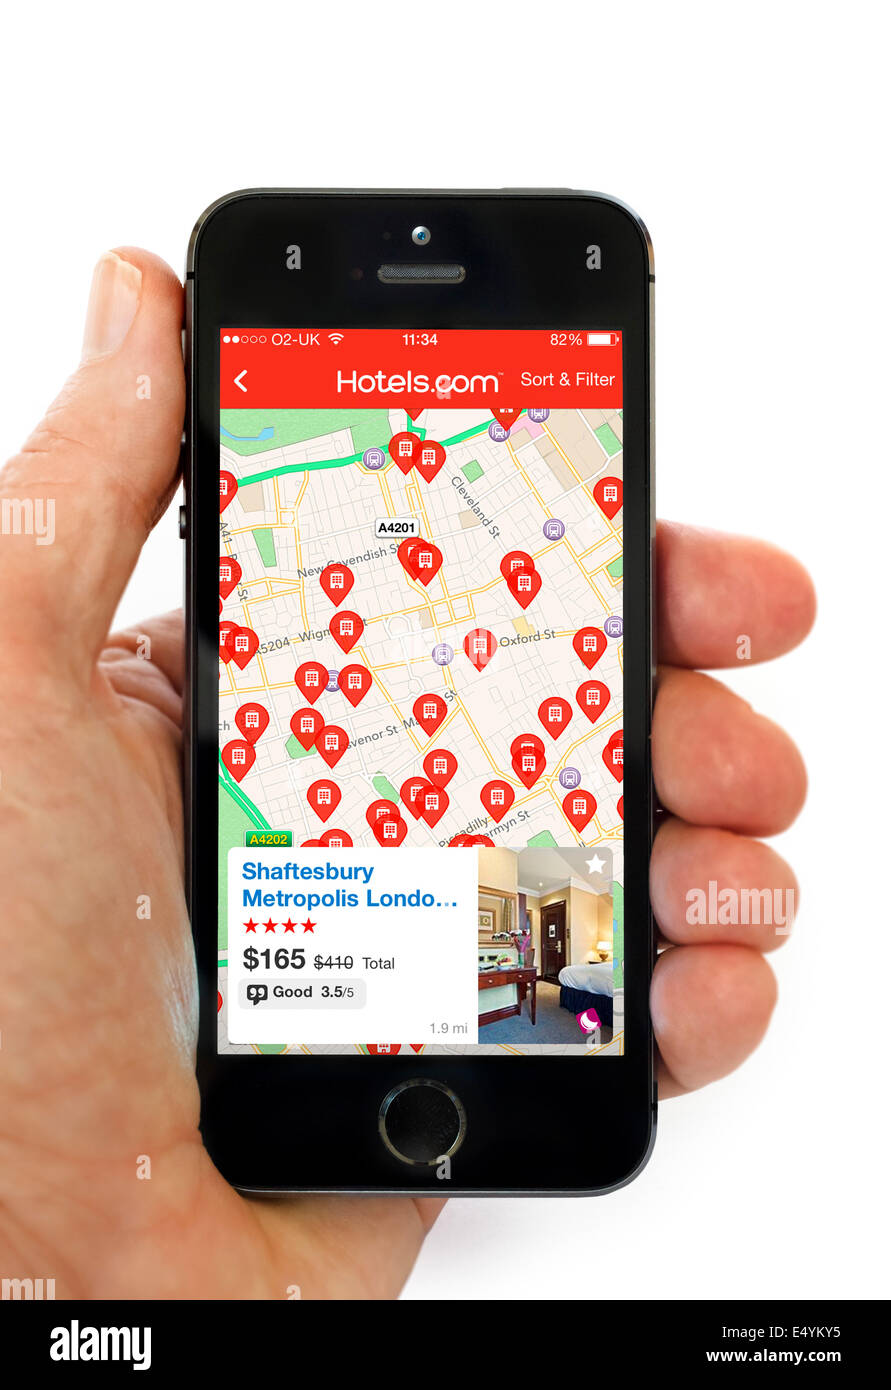 The Hotels.com app on an Apple iPhone 5S, UK Stock Photo